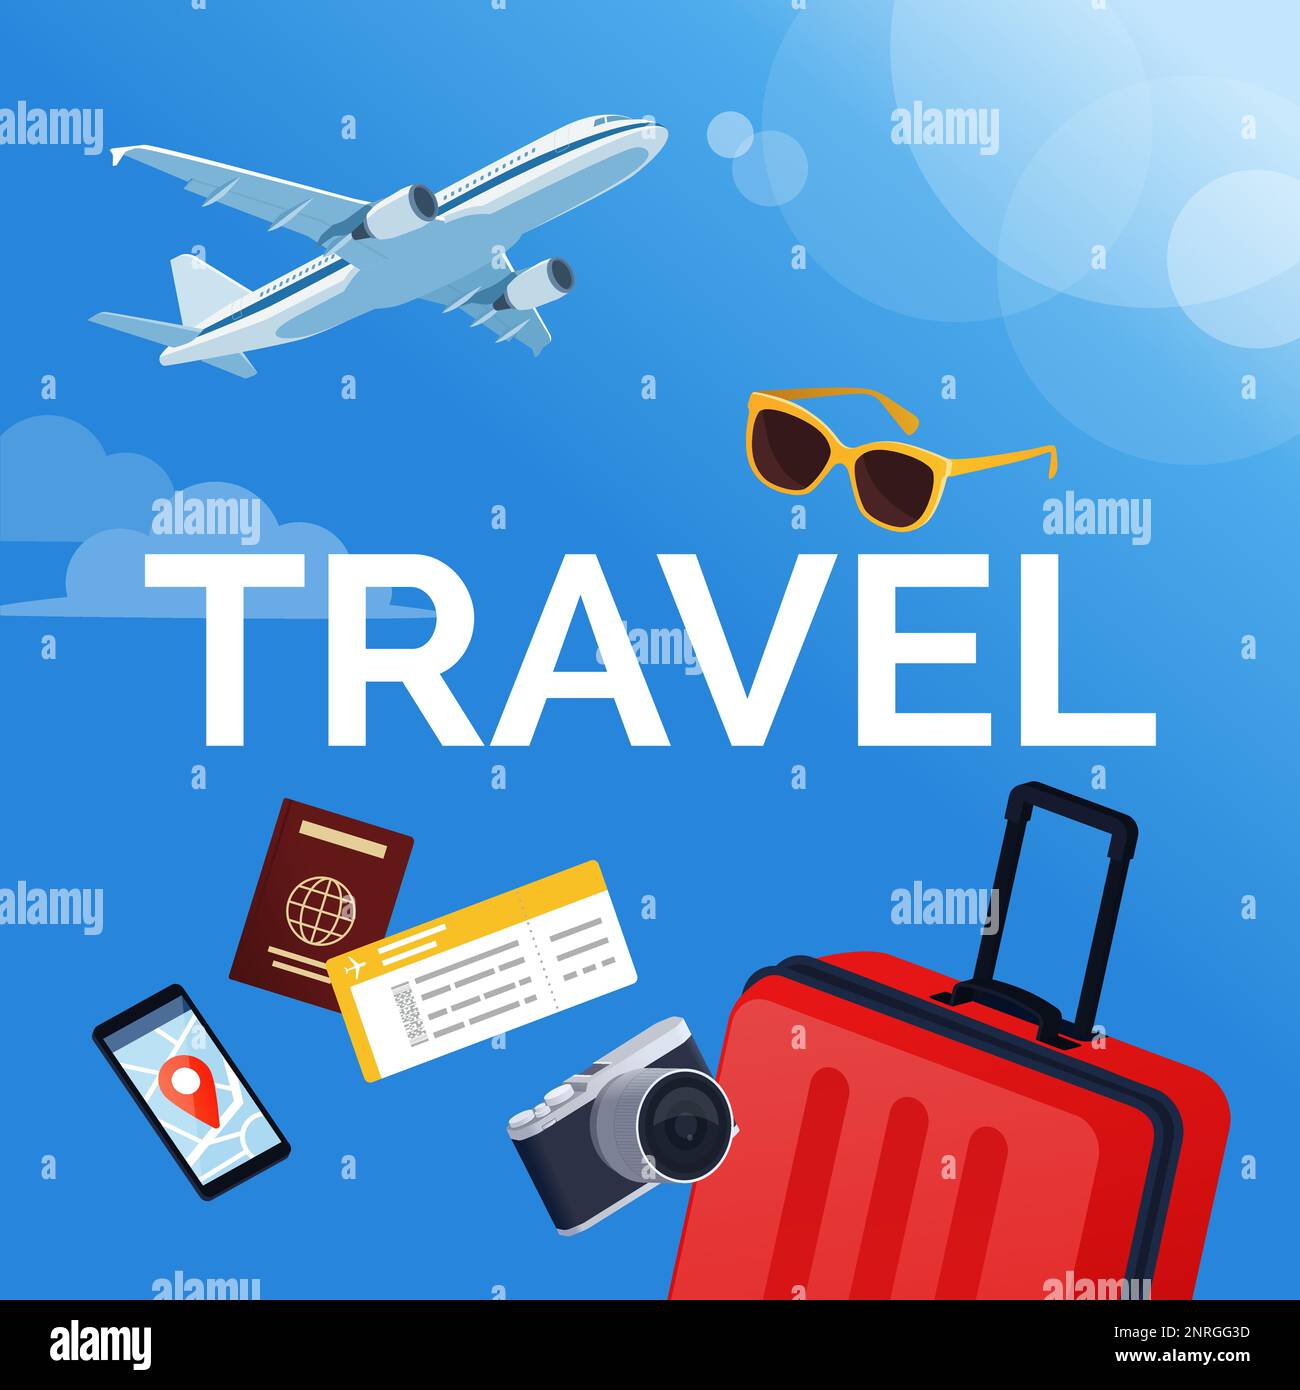 Travel text with travel accessories, and airplane flying in the background: international travel and tourism concept Stock Vector